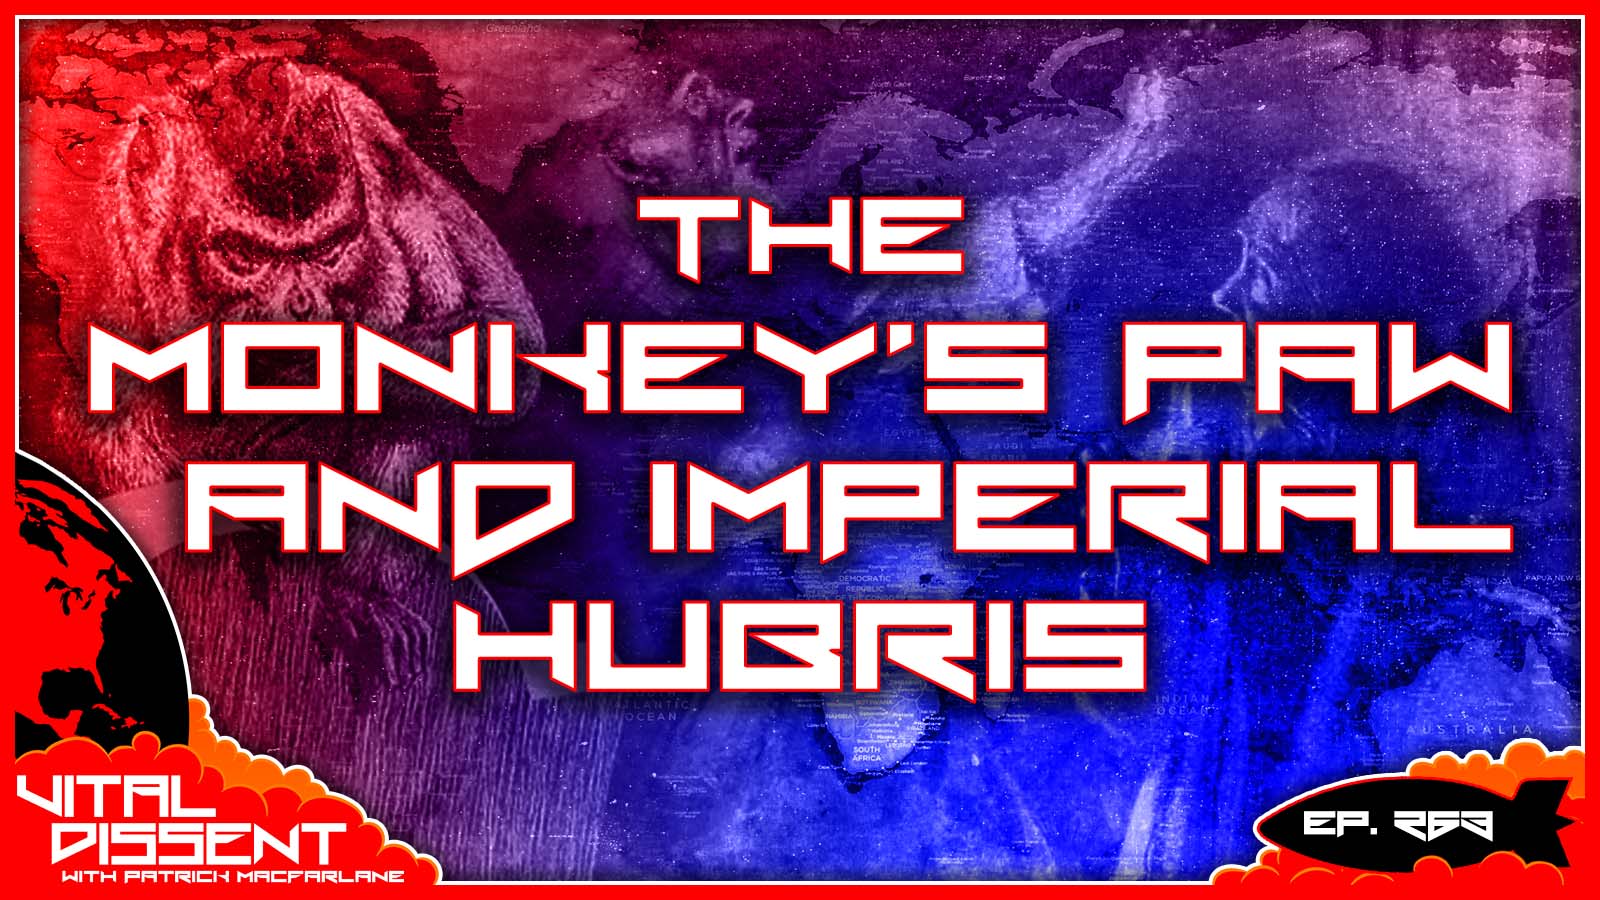 The Monkey’s Paw and Imperial Hubris Ep. 263